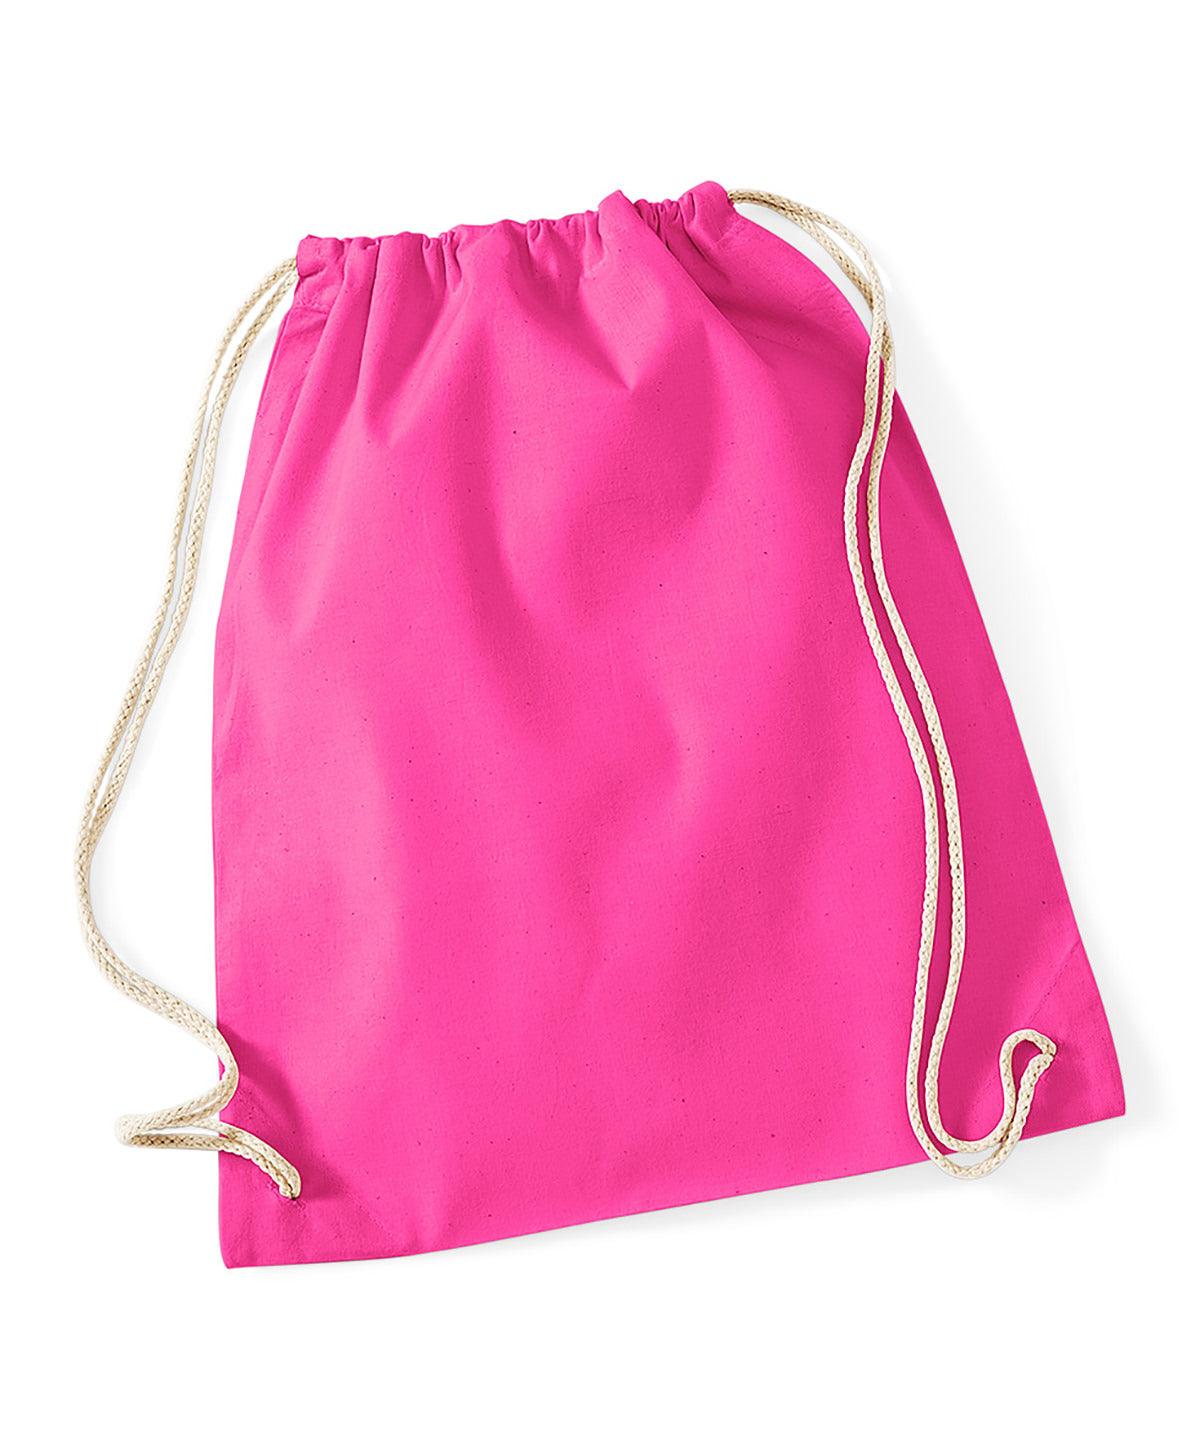 Fuchsia - Cotton gymsac Bags Westford Mill Bags & Luggage, Junior, Must Haves, Pastels and Tie Dye Schoolwear Centres